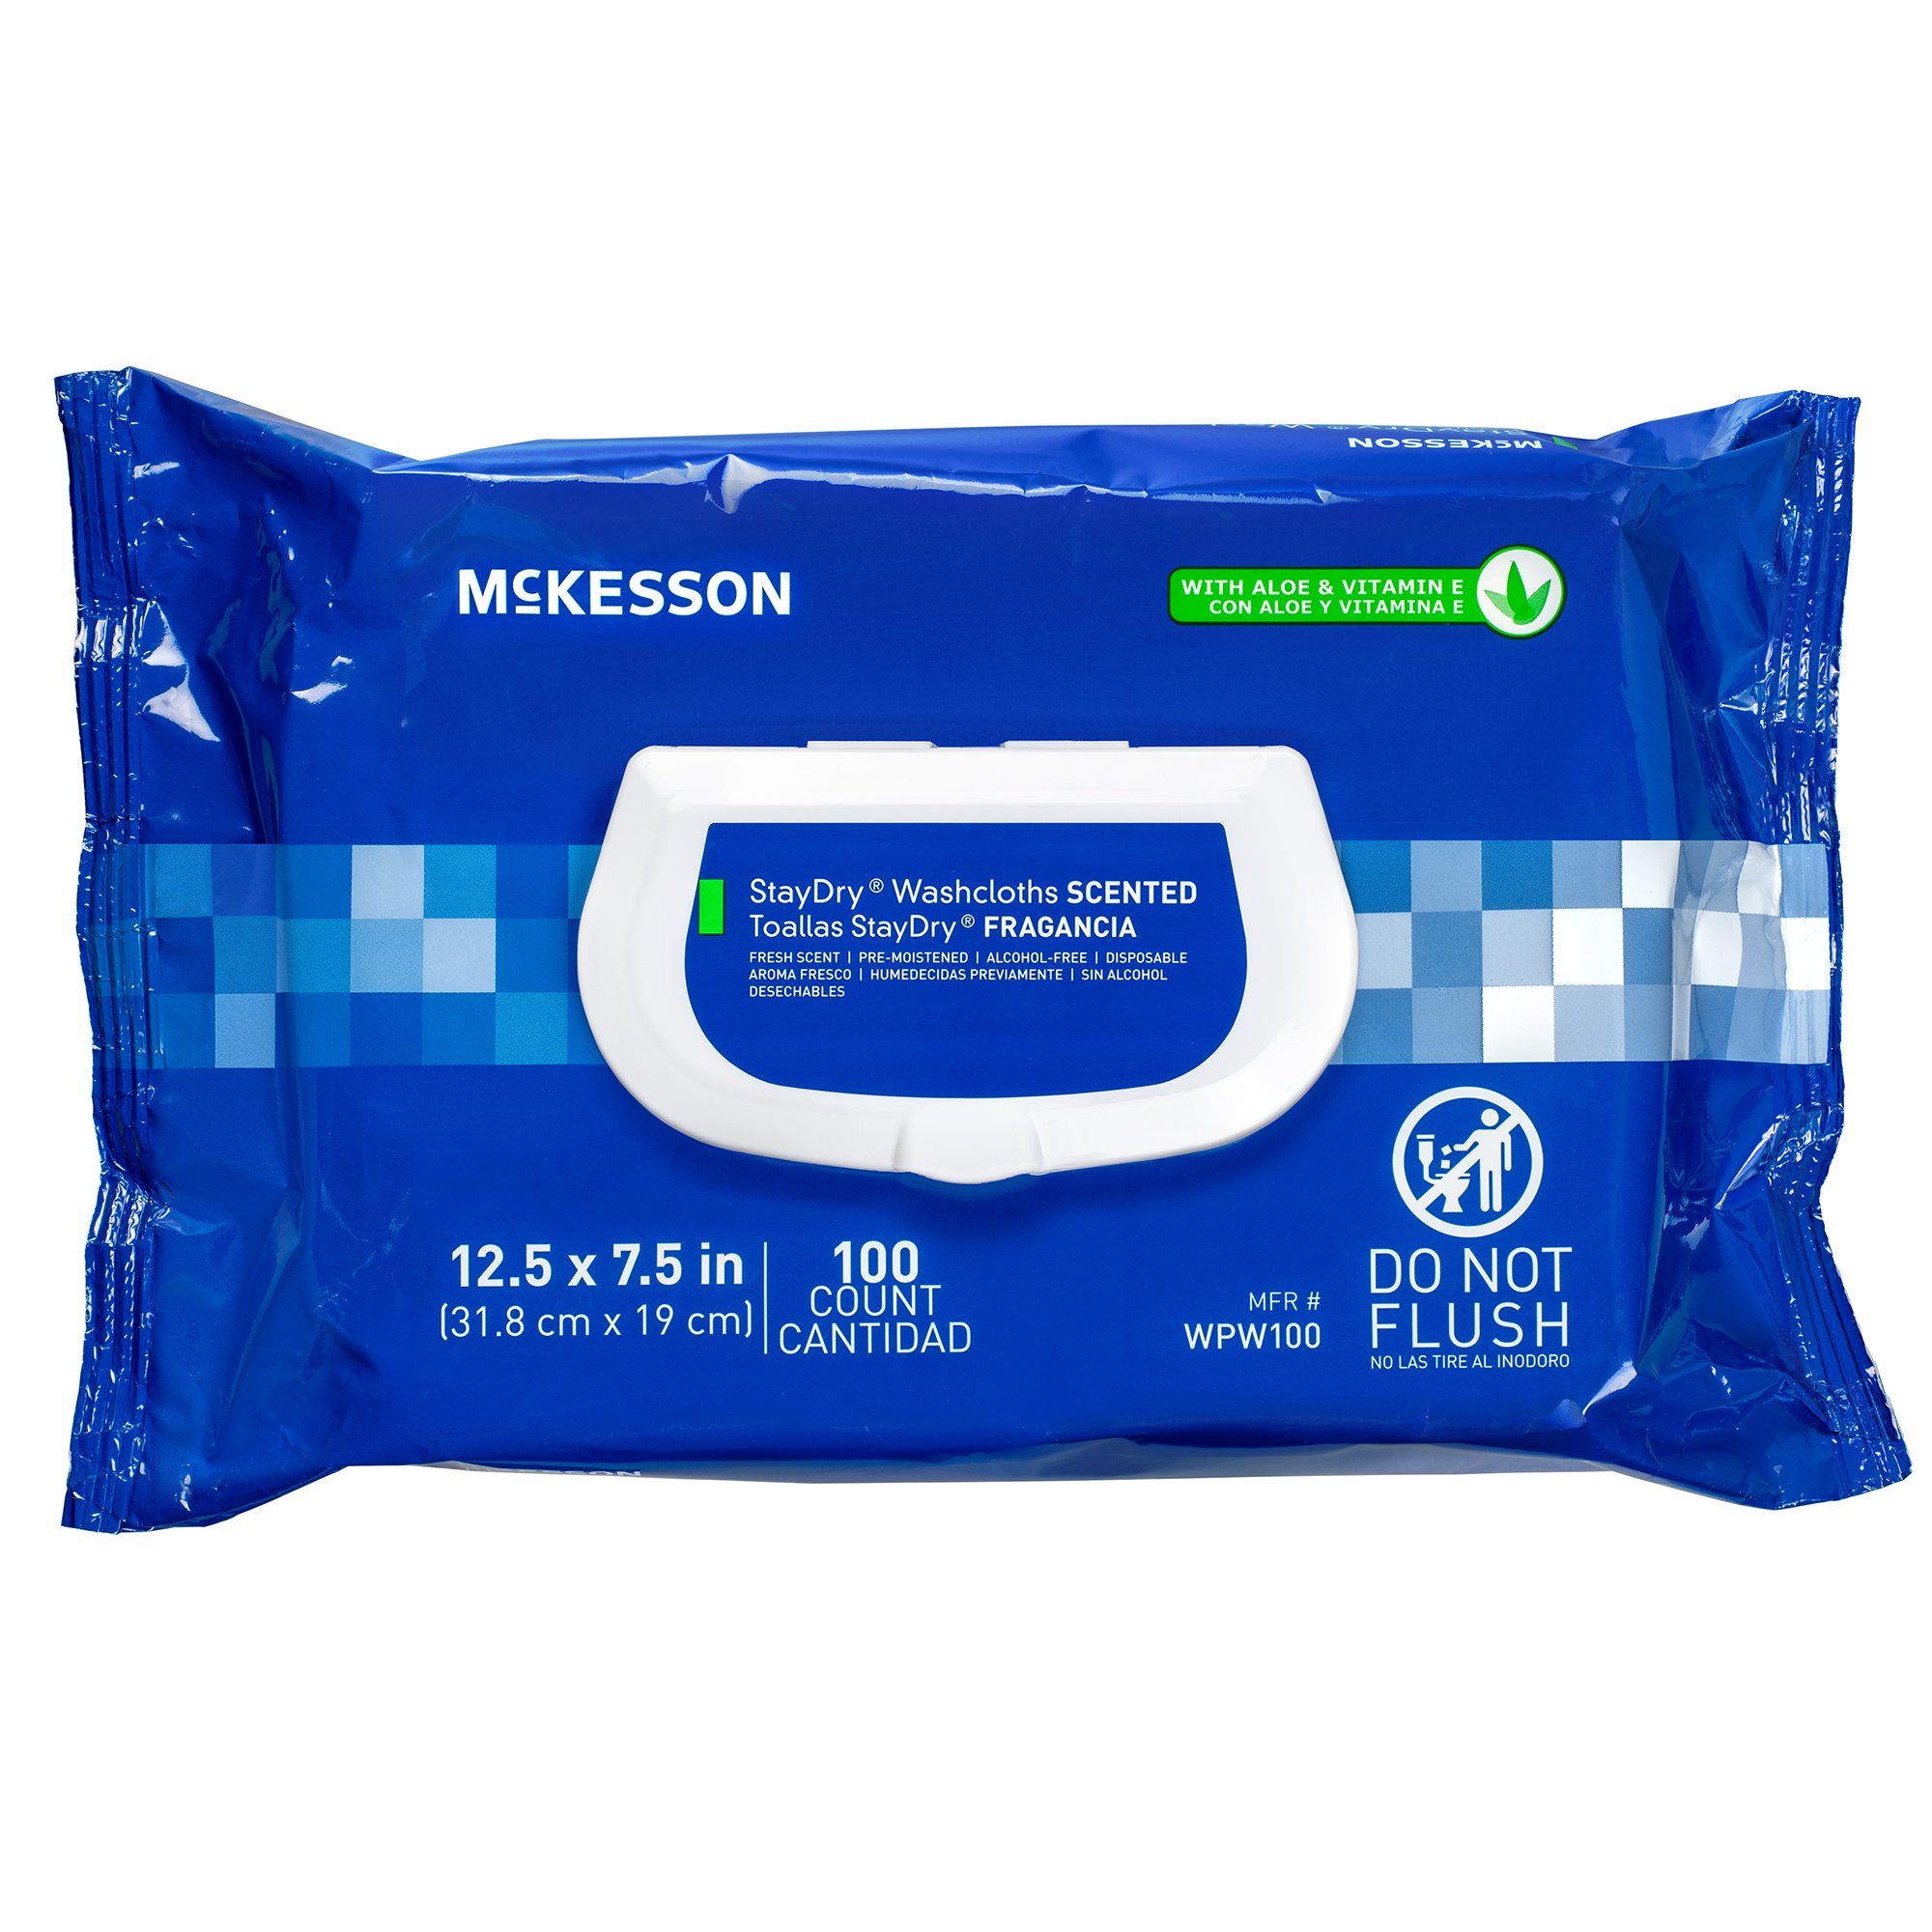 McKesson Staydry Disposable Washclothes, Scented, 1 pack - 100 ct